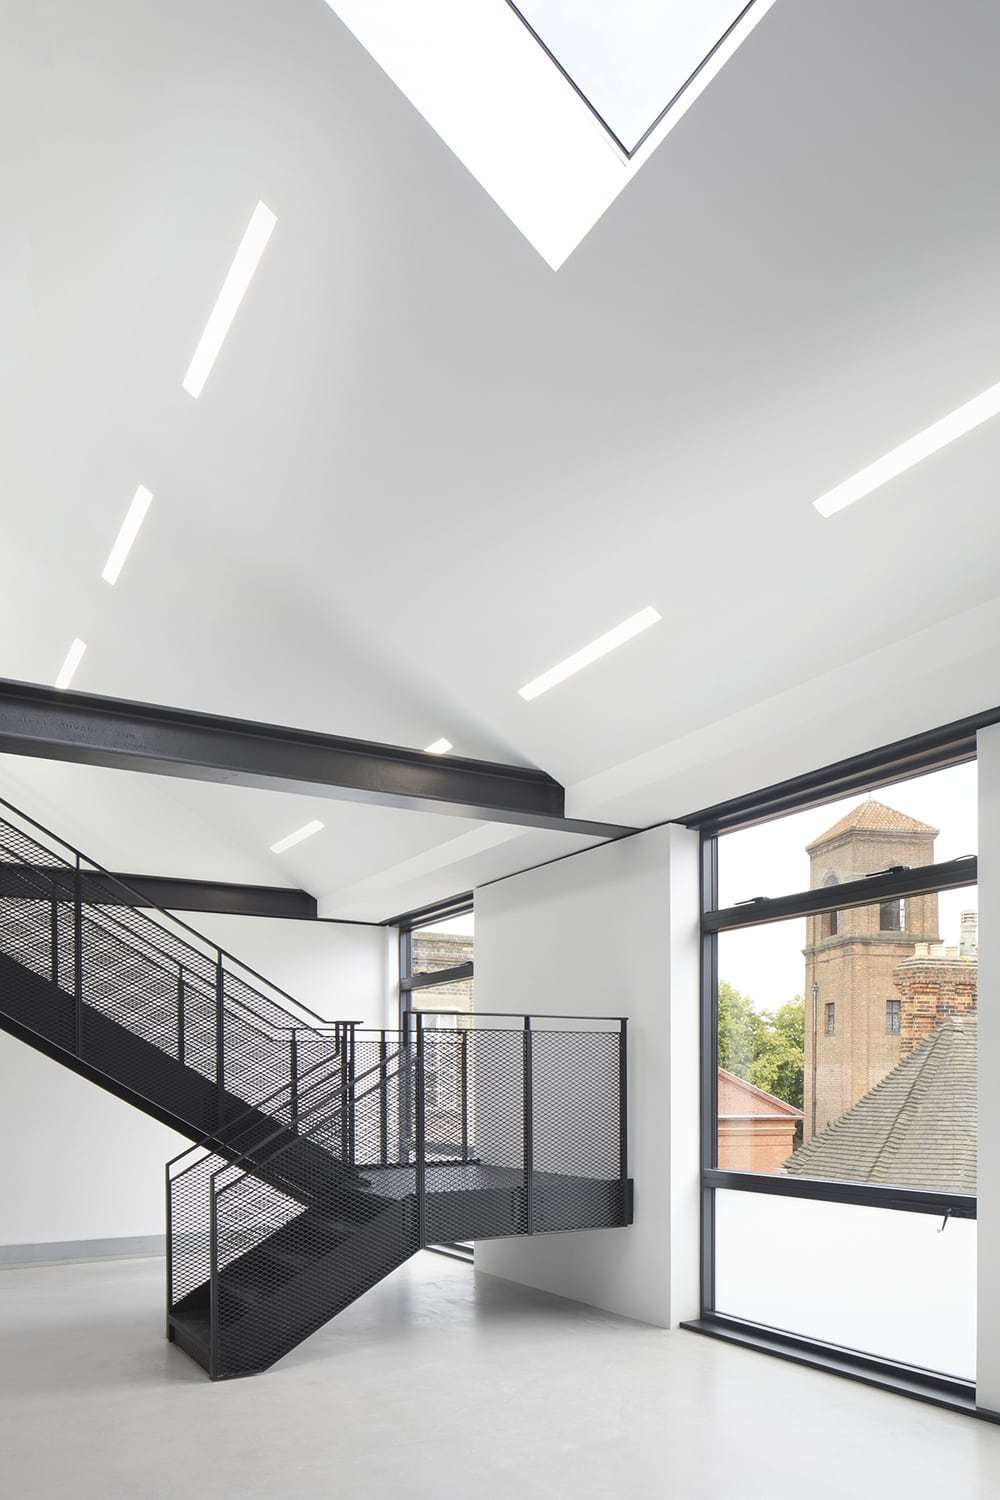 Barley Mow Centre, London by Ben Adams Architects